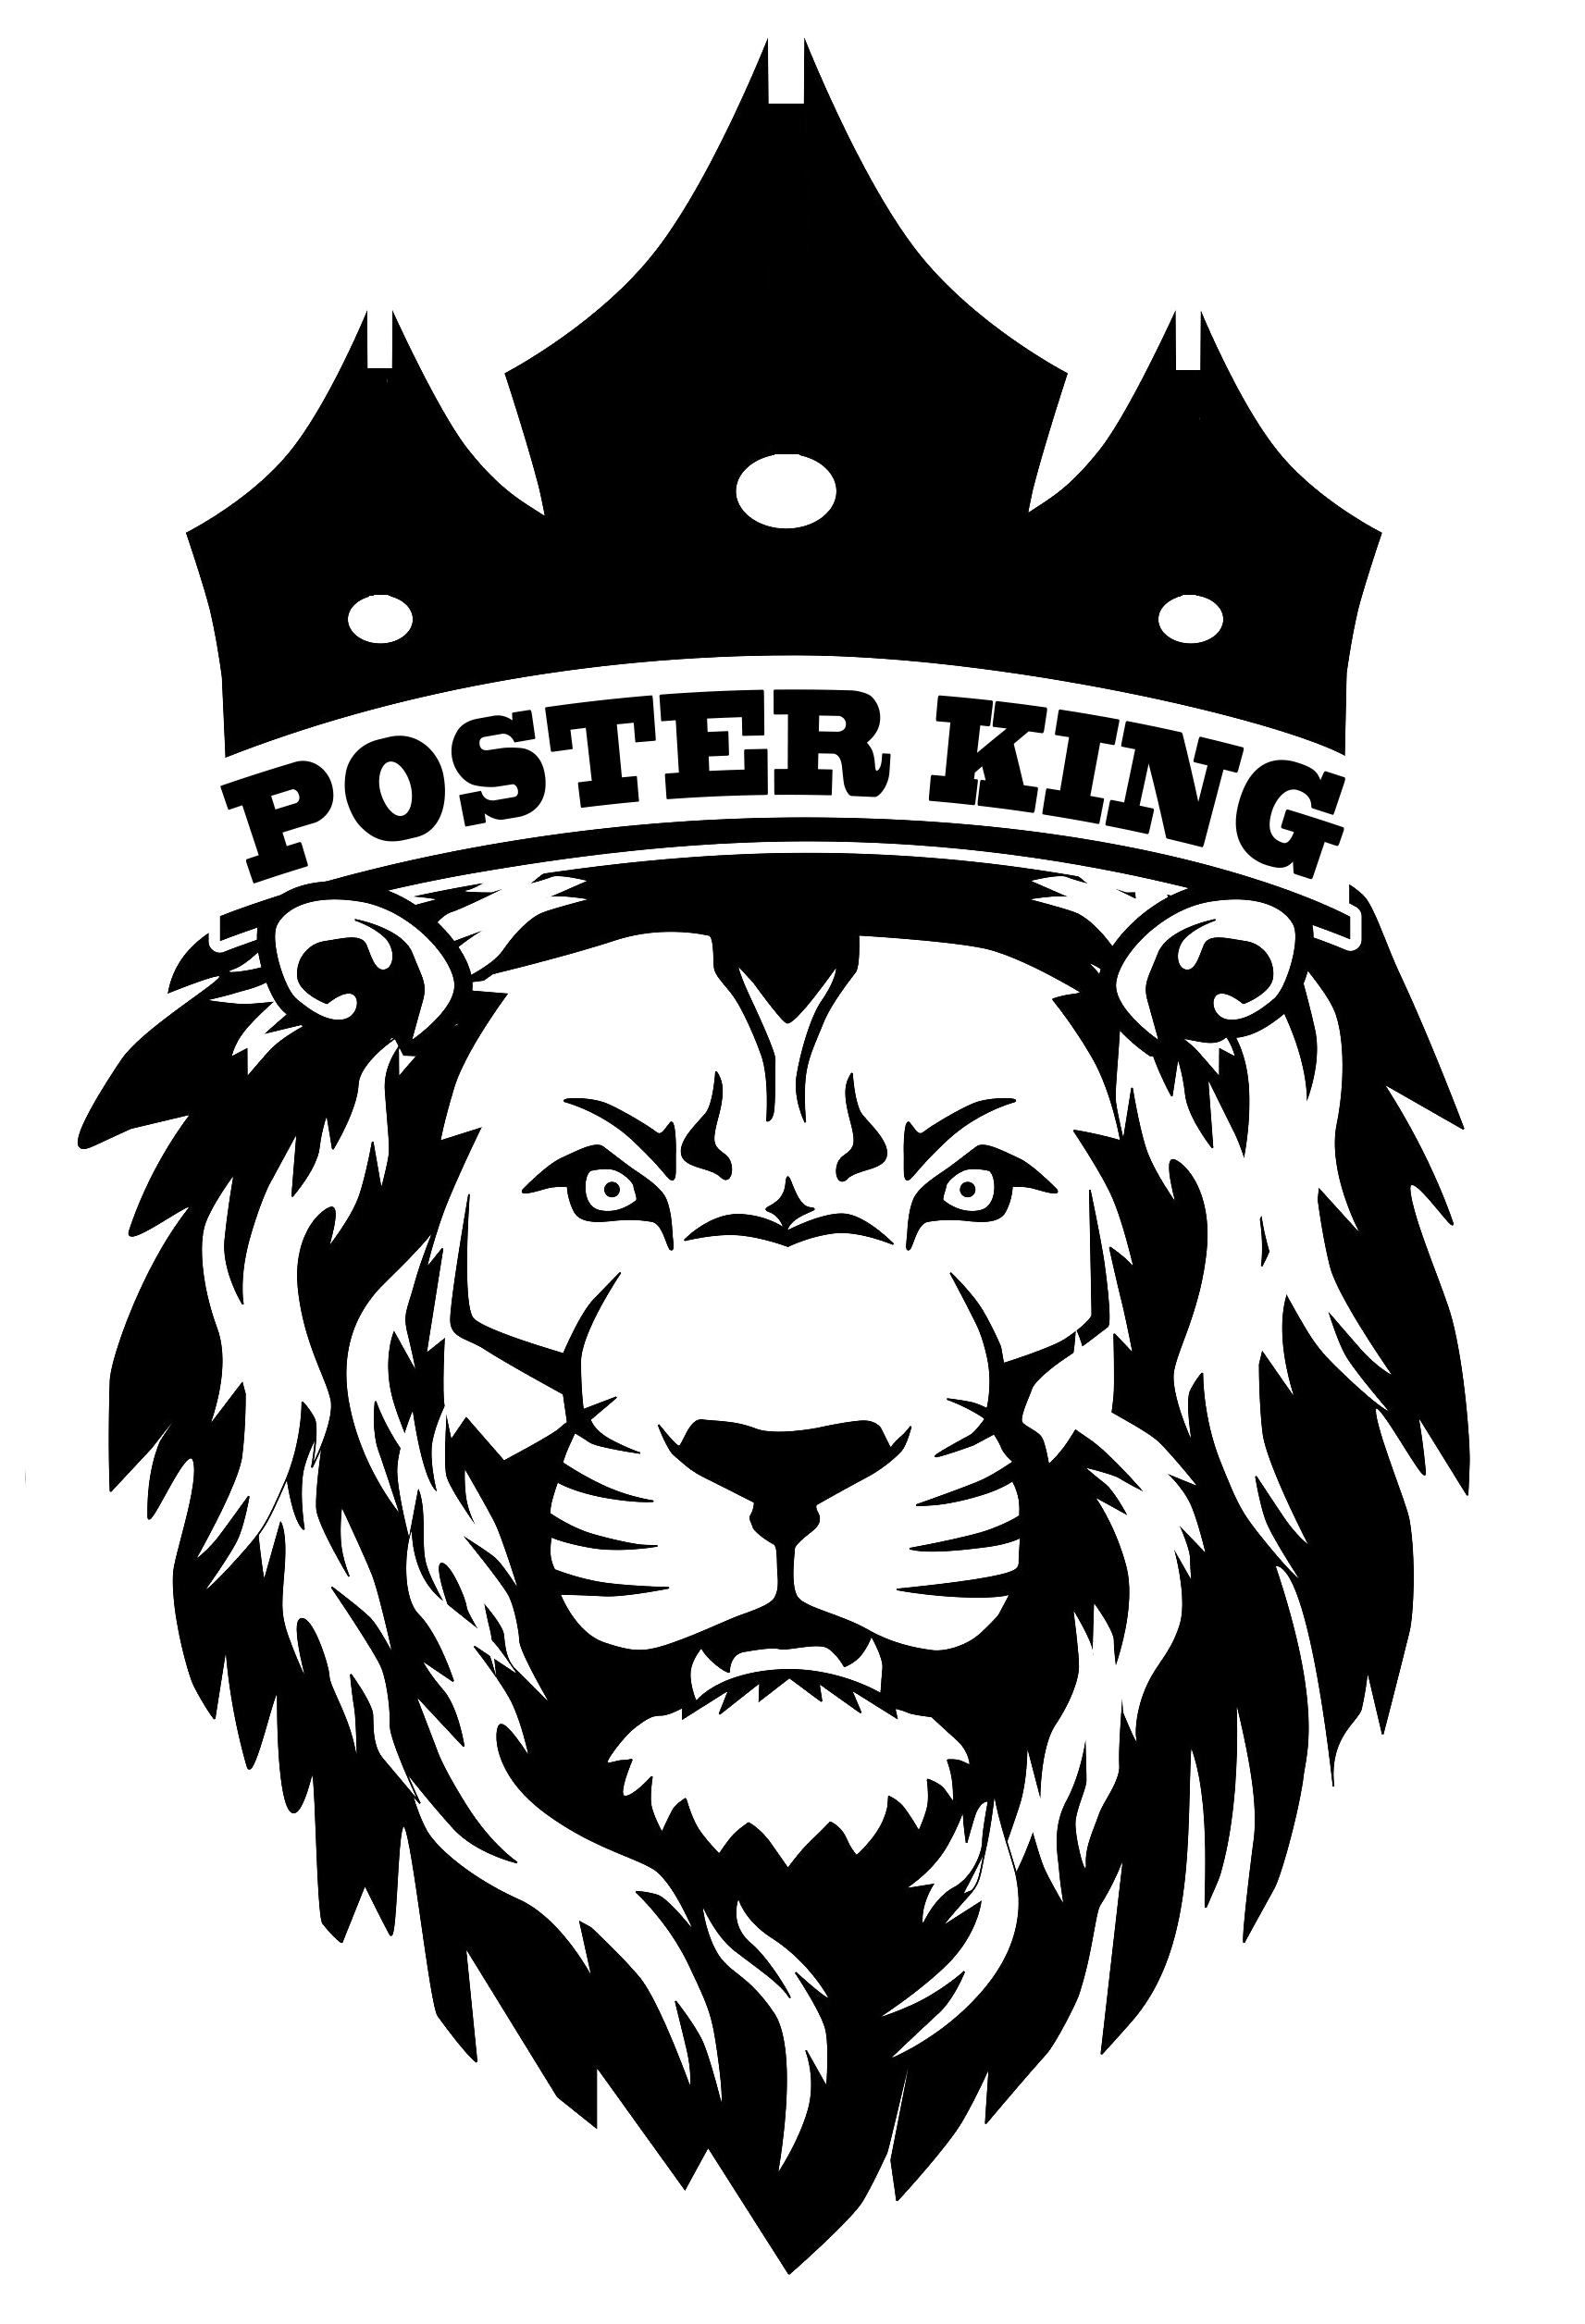 Lion monochrome graphics Royalty Free Stock SVG Vector